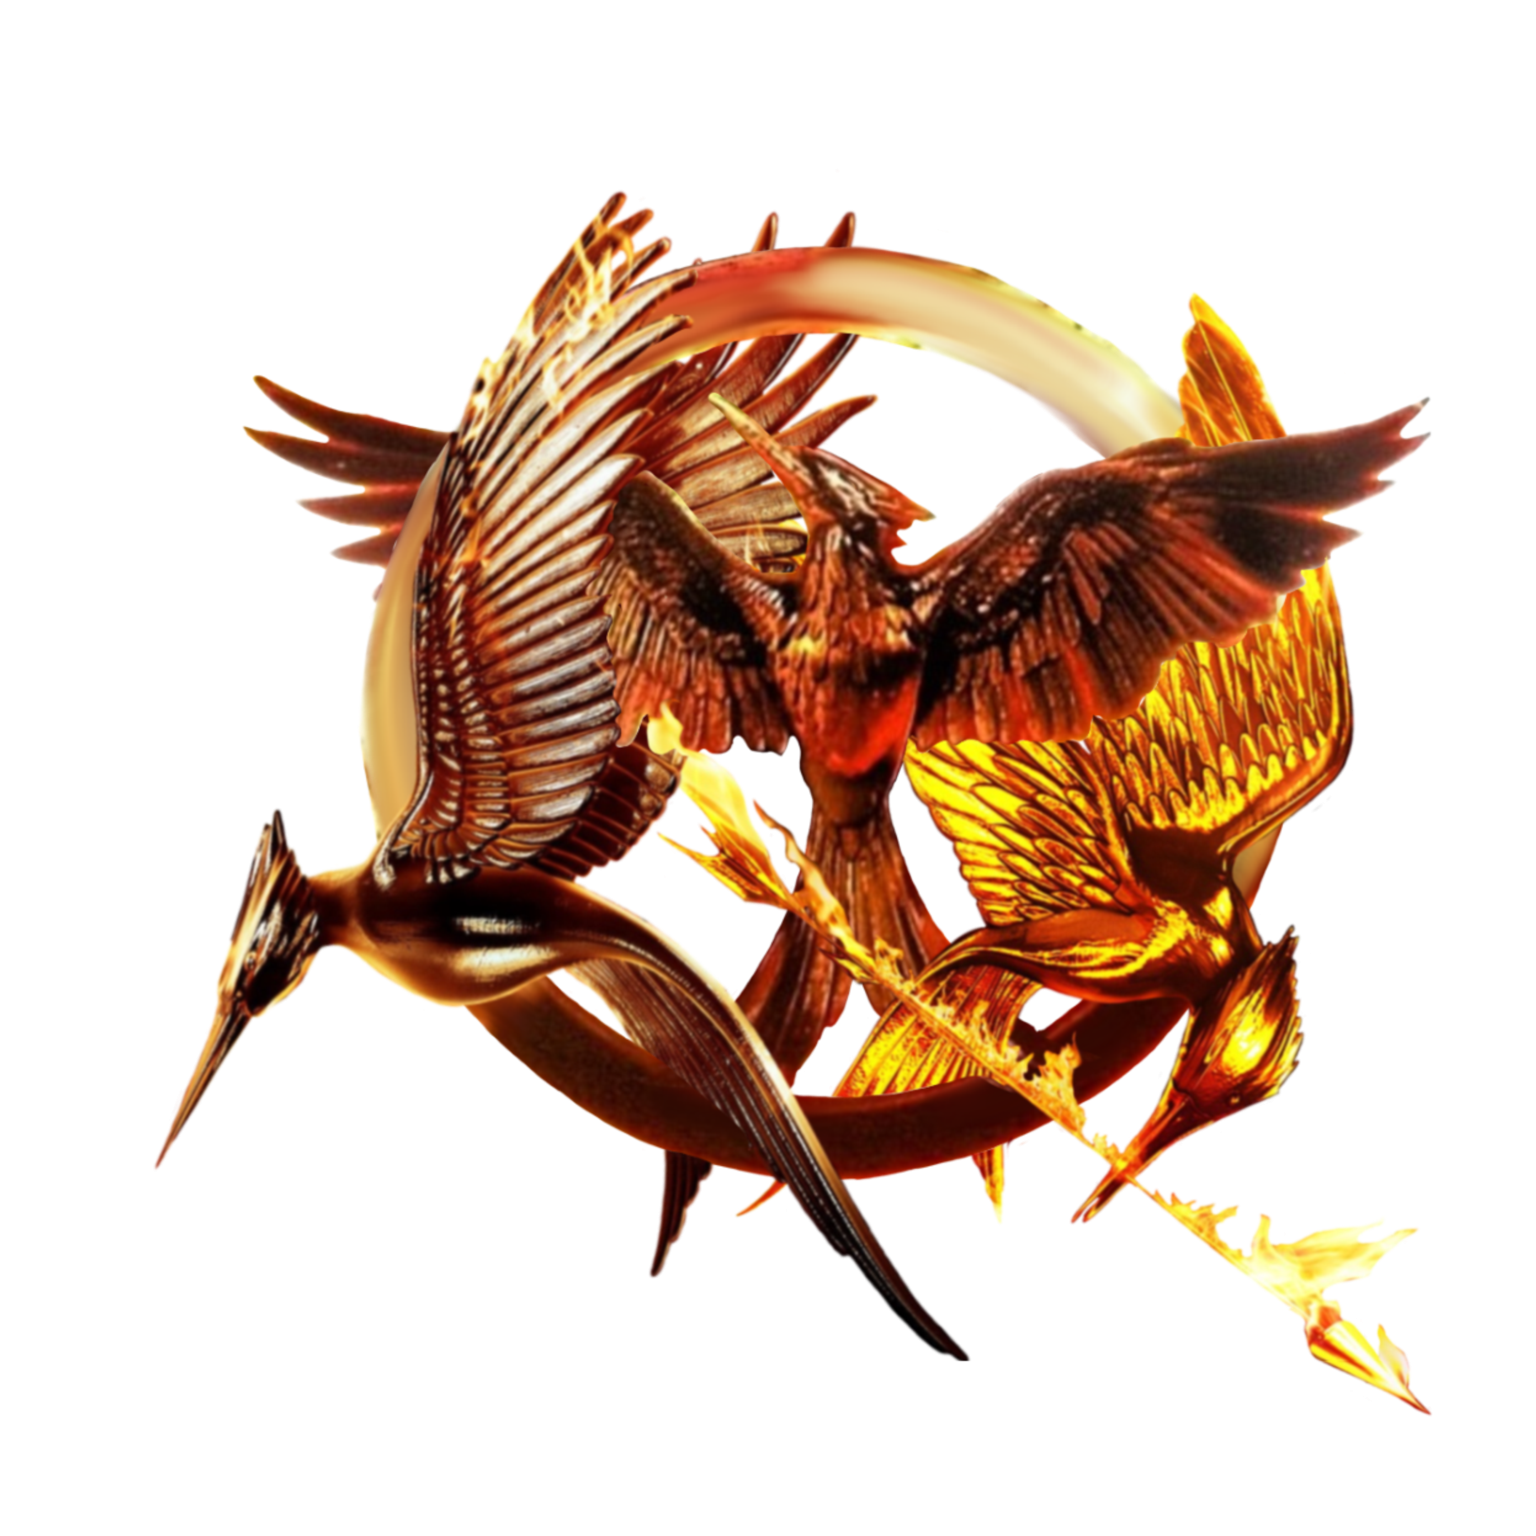 The Hunger Games PNG HD and Transparent pngteam.com